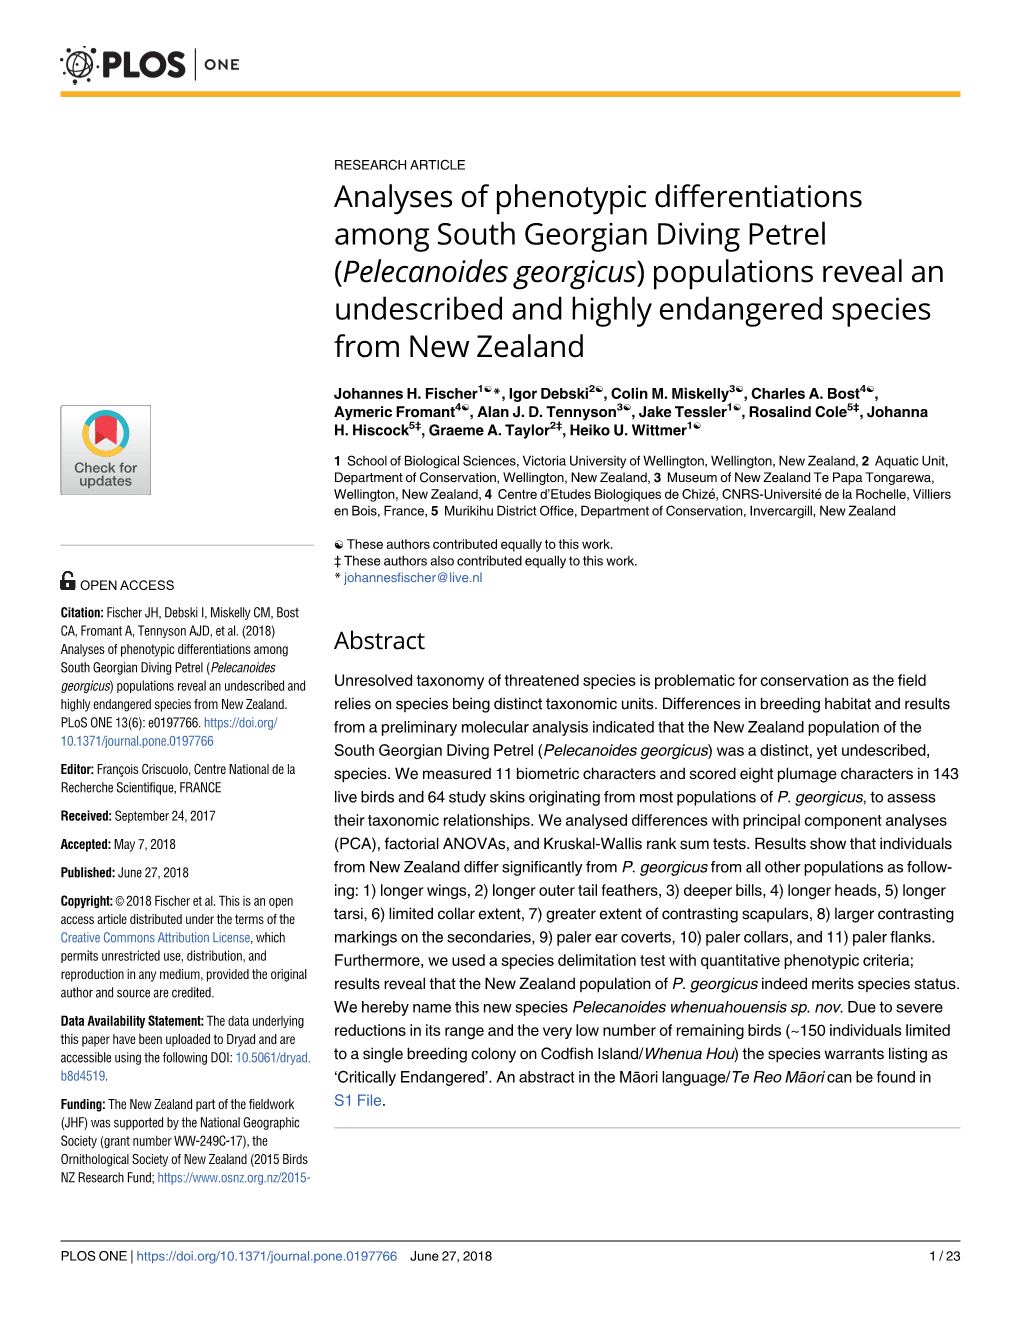 Pelecanoides Georgicus) Populations Reveal an Undescribed and Highly Endangered Species from New Zealand